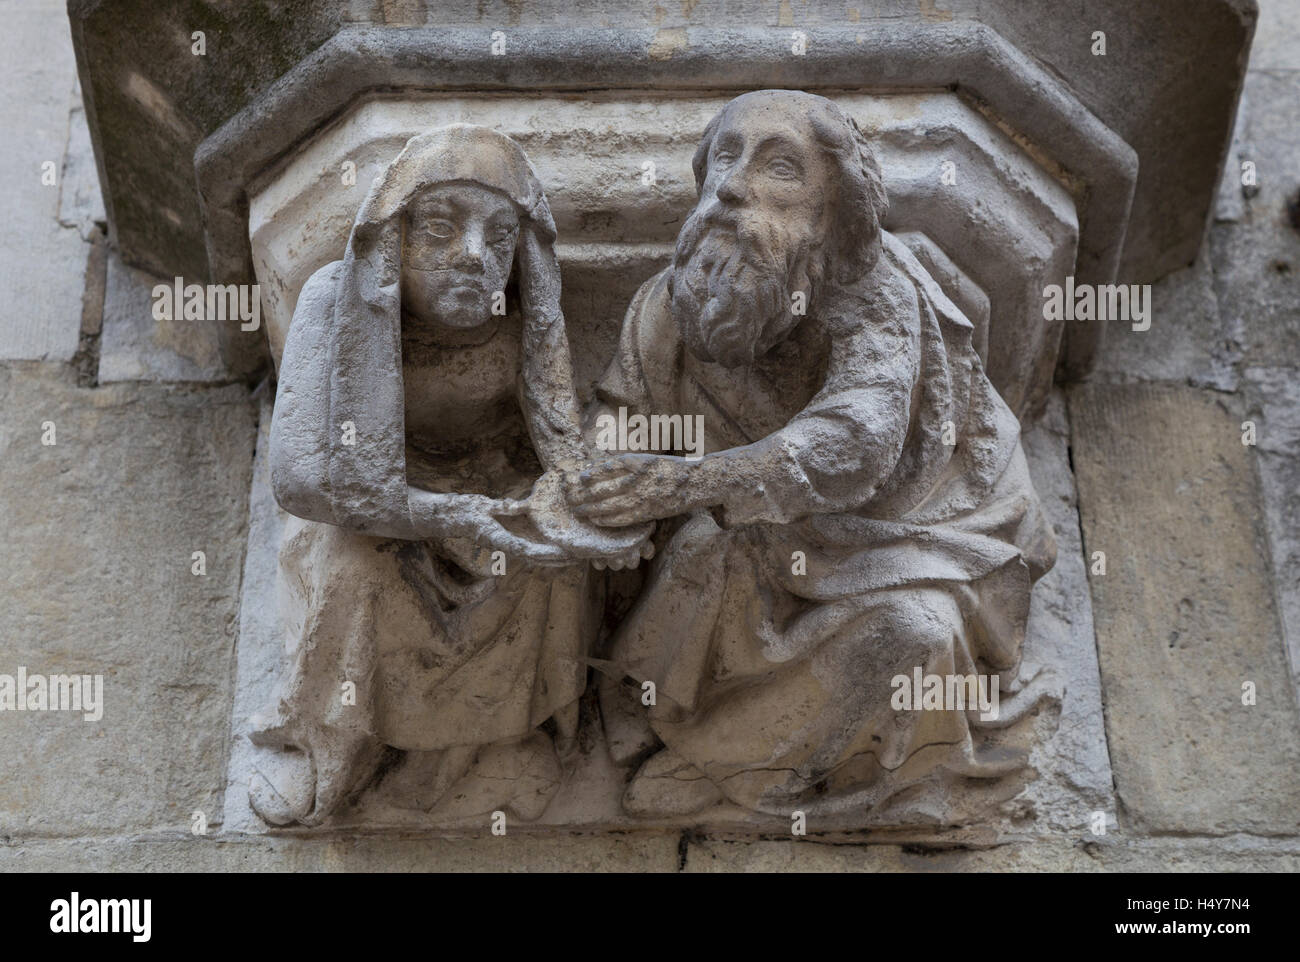 Detail beneath one of the statues on the facade of the Stadhuis, Brugge, Belgium Stock Photo